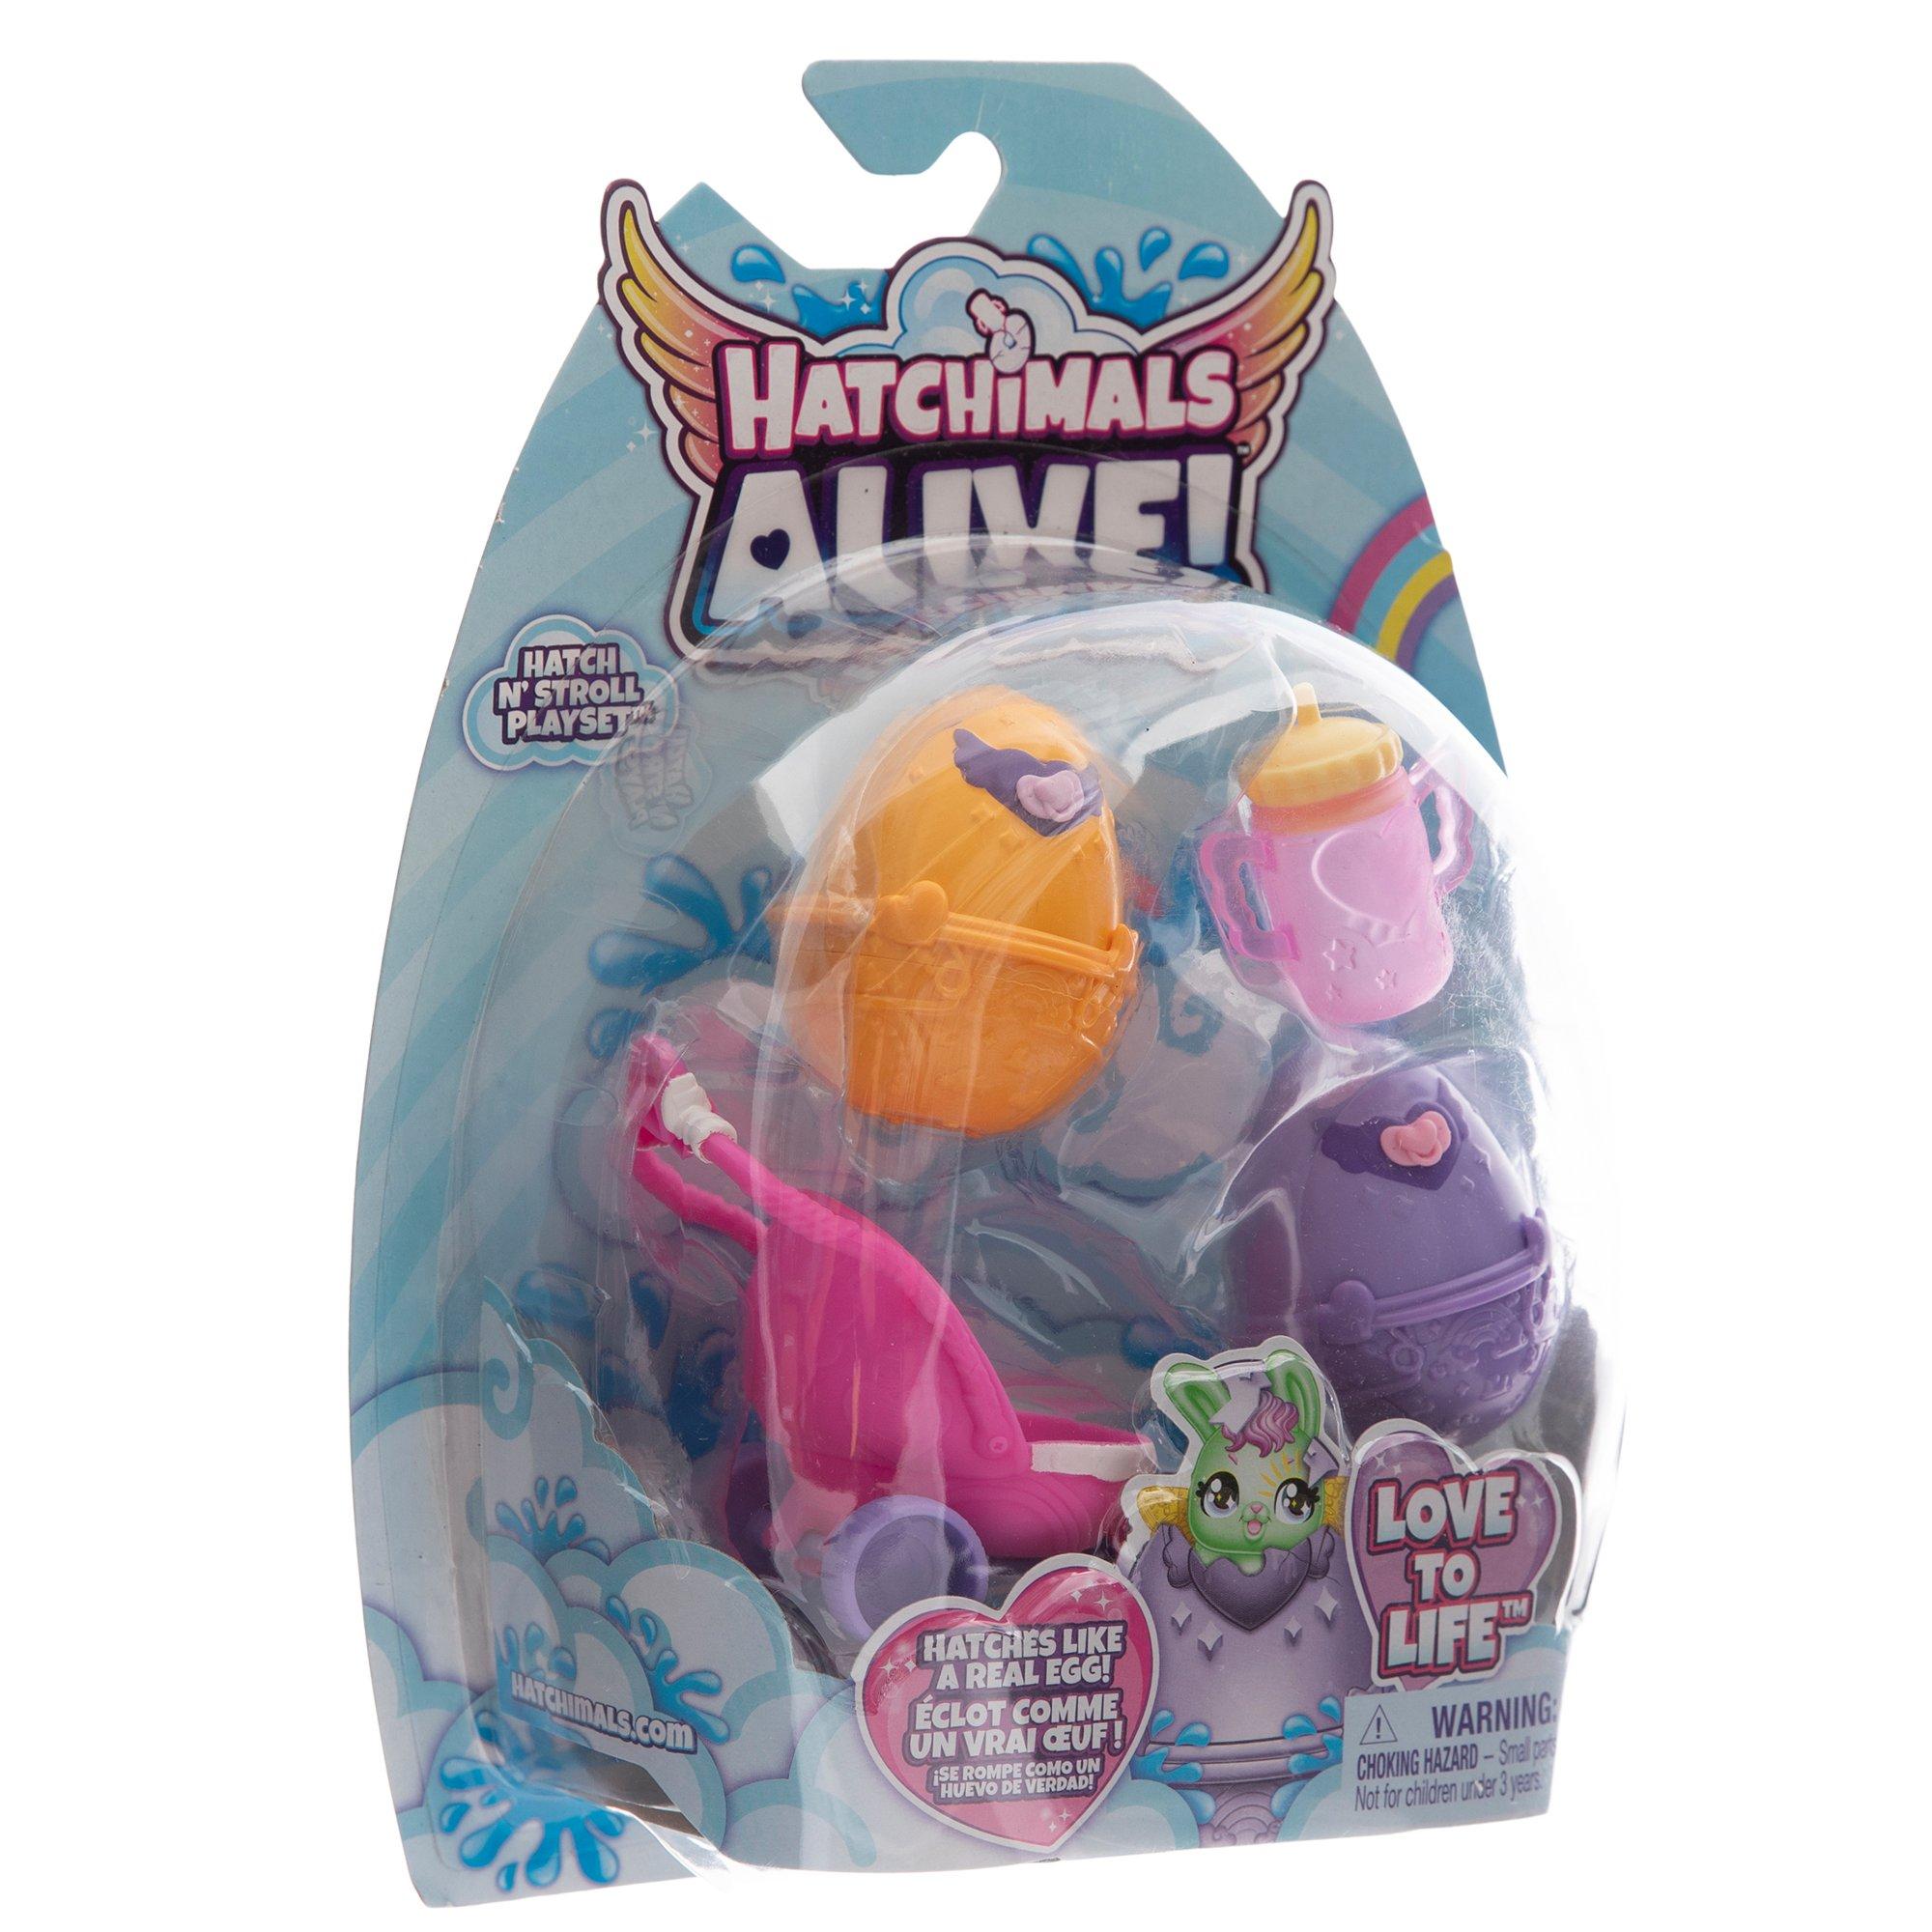  Hatchimals Alive, Hatch N' Stroll Playset with Stroller Toy and  2 Mini Figures in Self-Hatching Eggs, Kids Toys for Girls and Boys Ages 3  and up : Everything Else